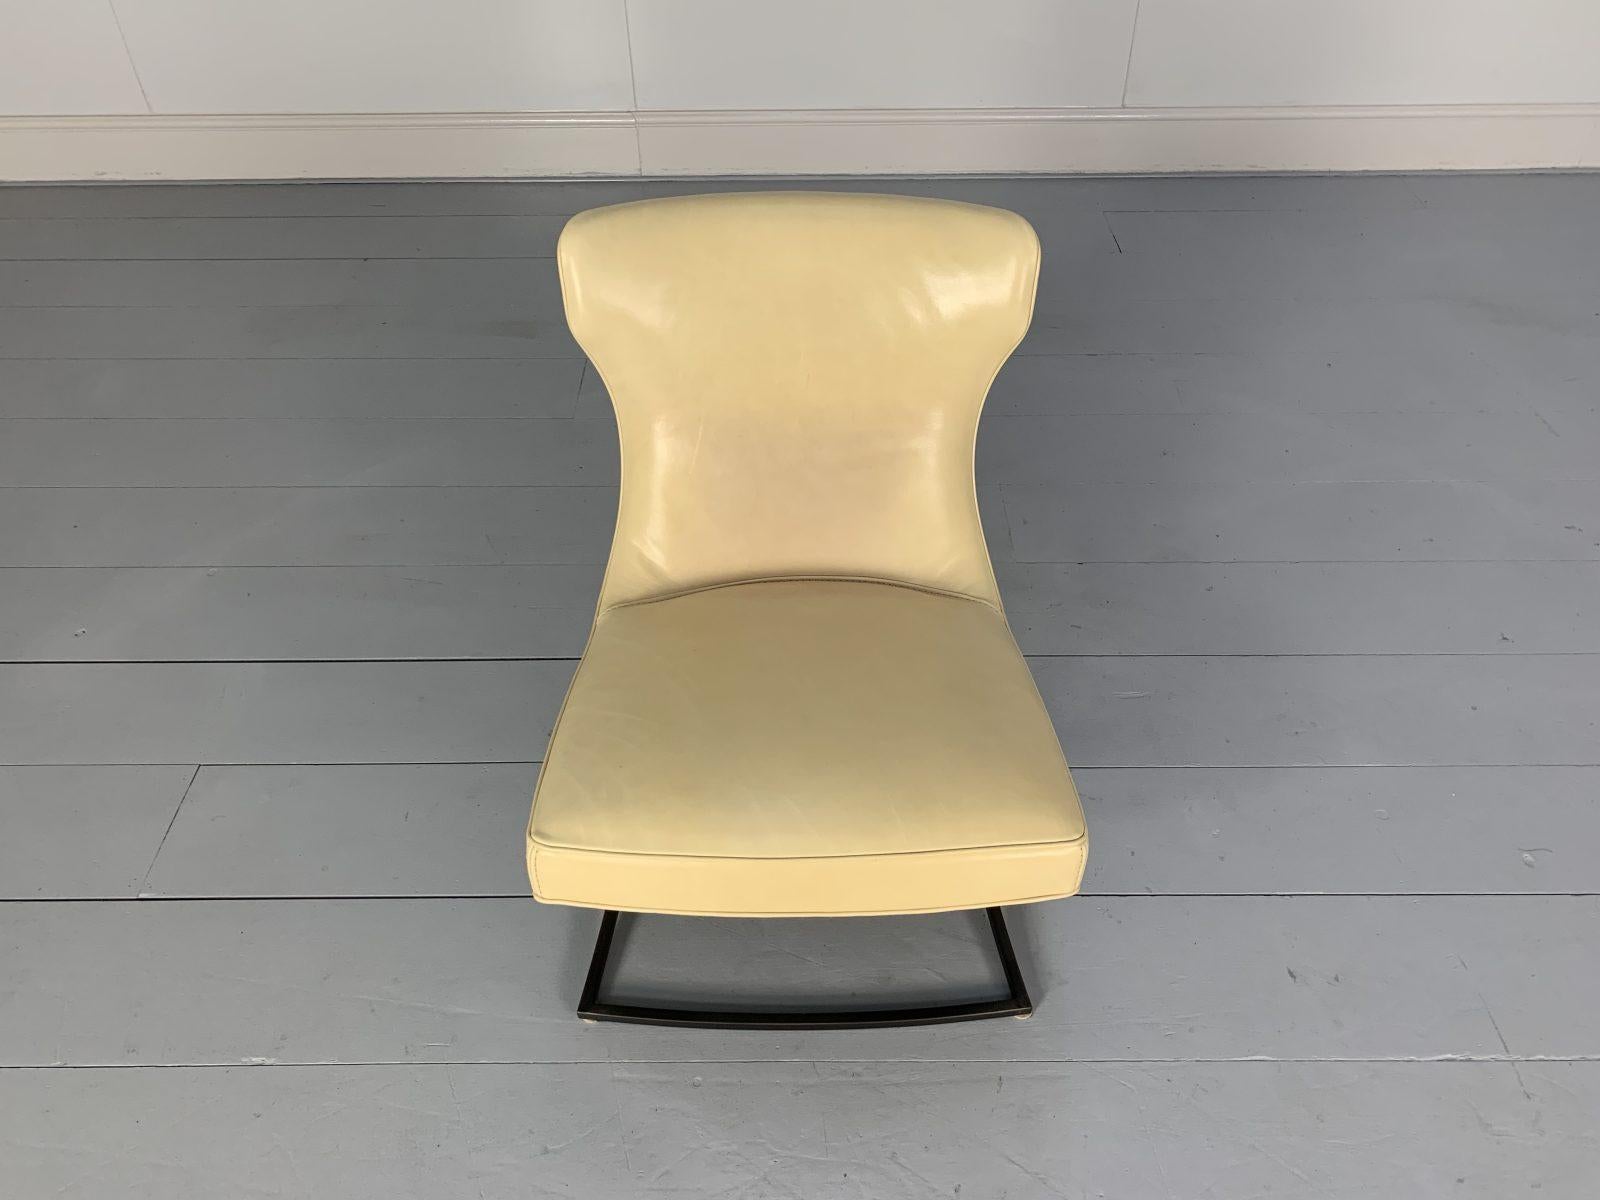 Pair of Baxter “Paloma” Chairs, in Cream Leather For Sale 6